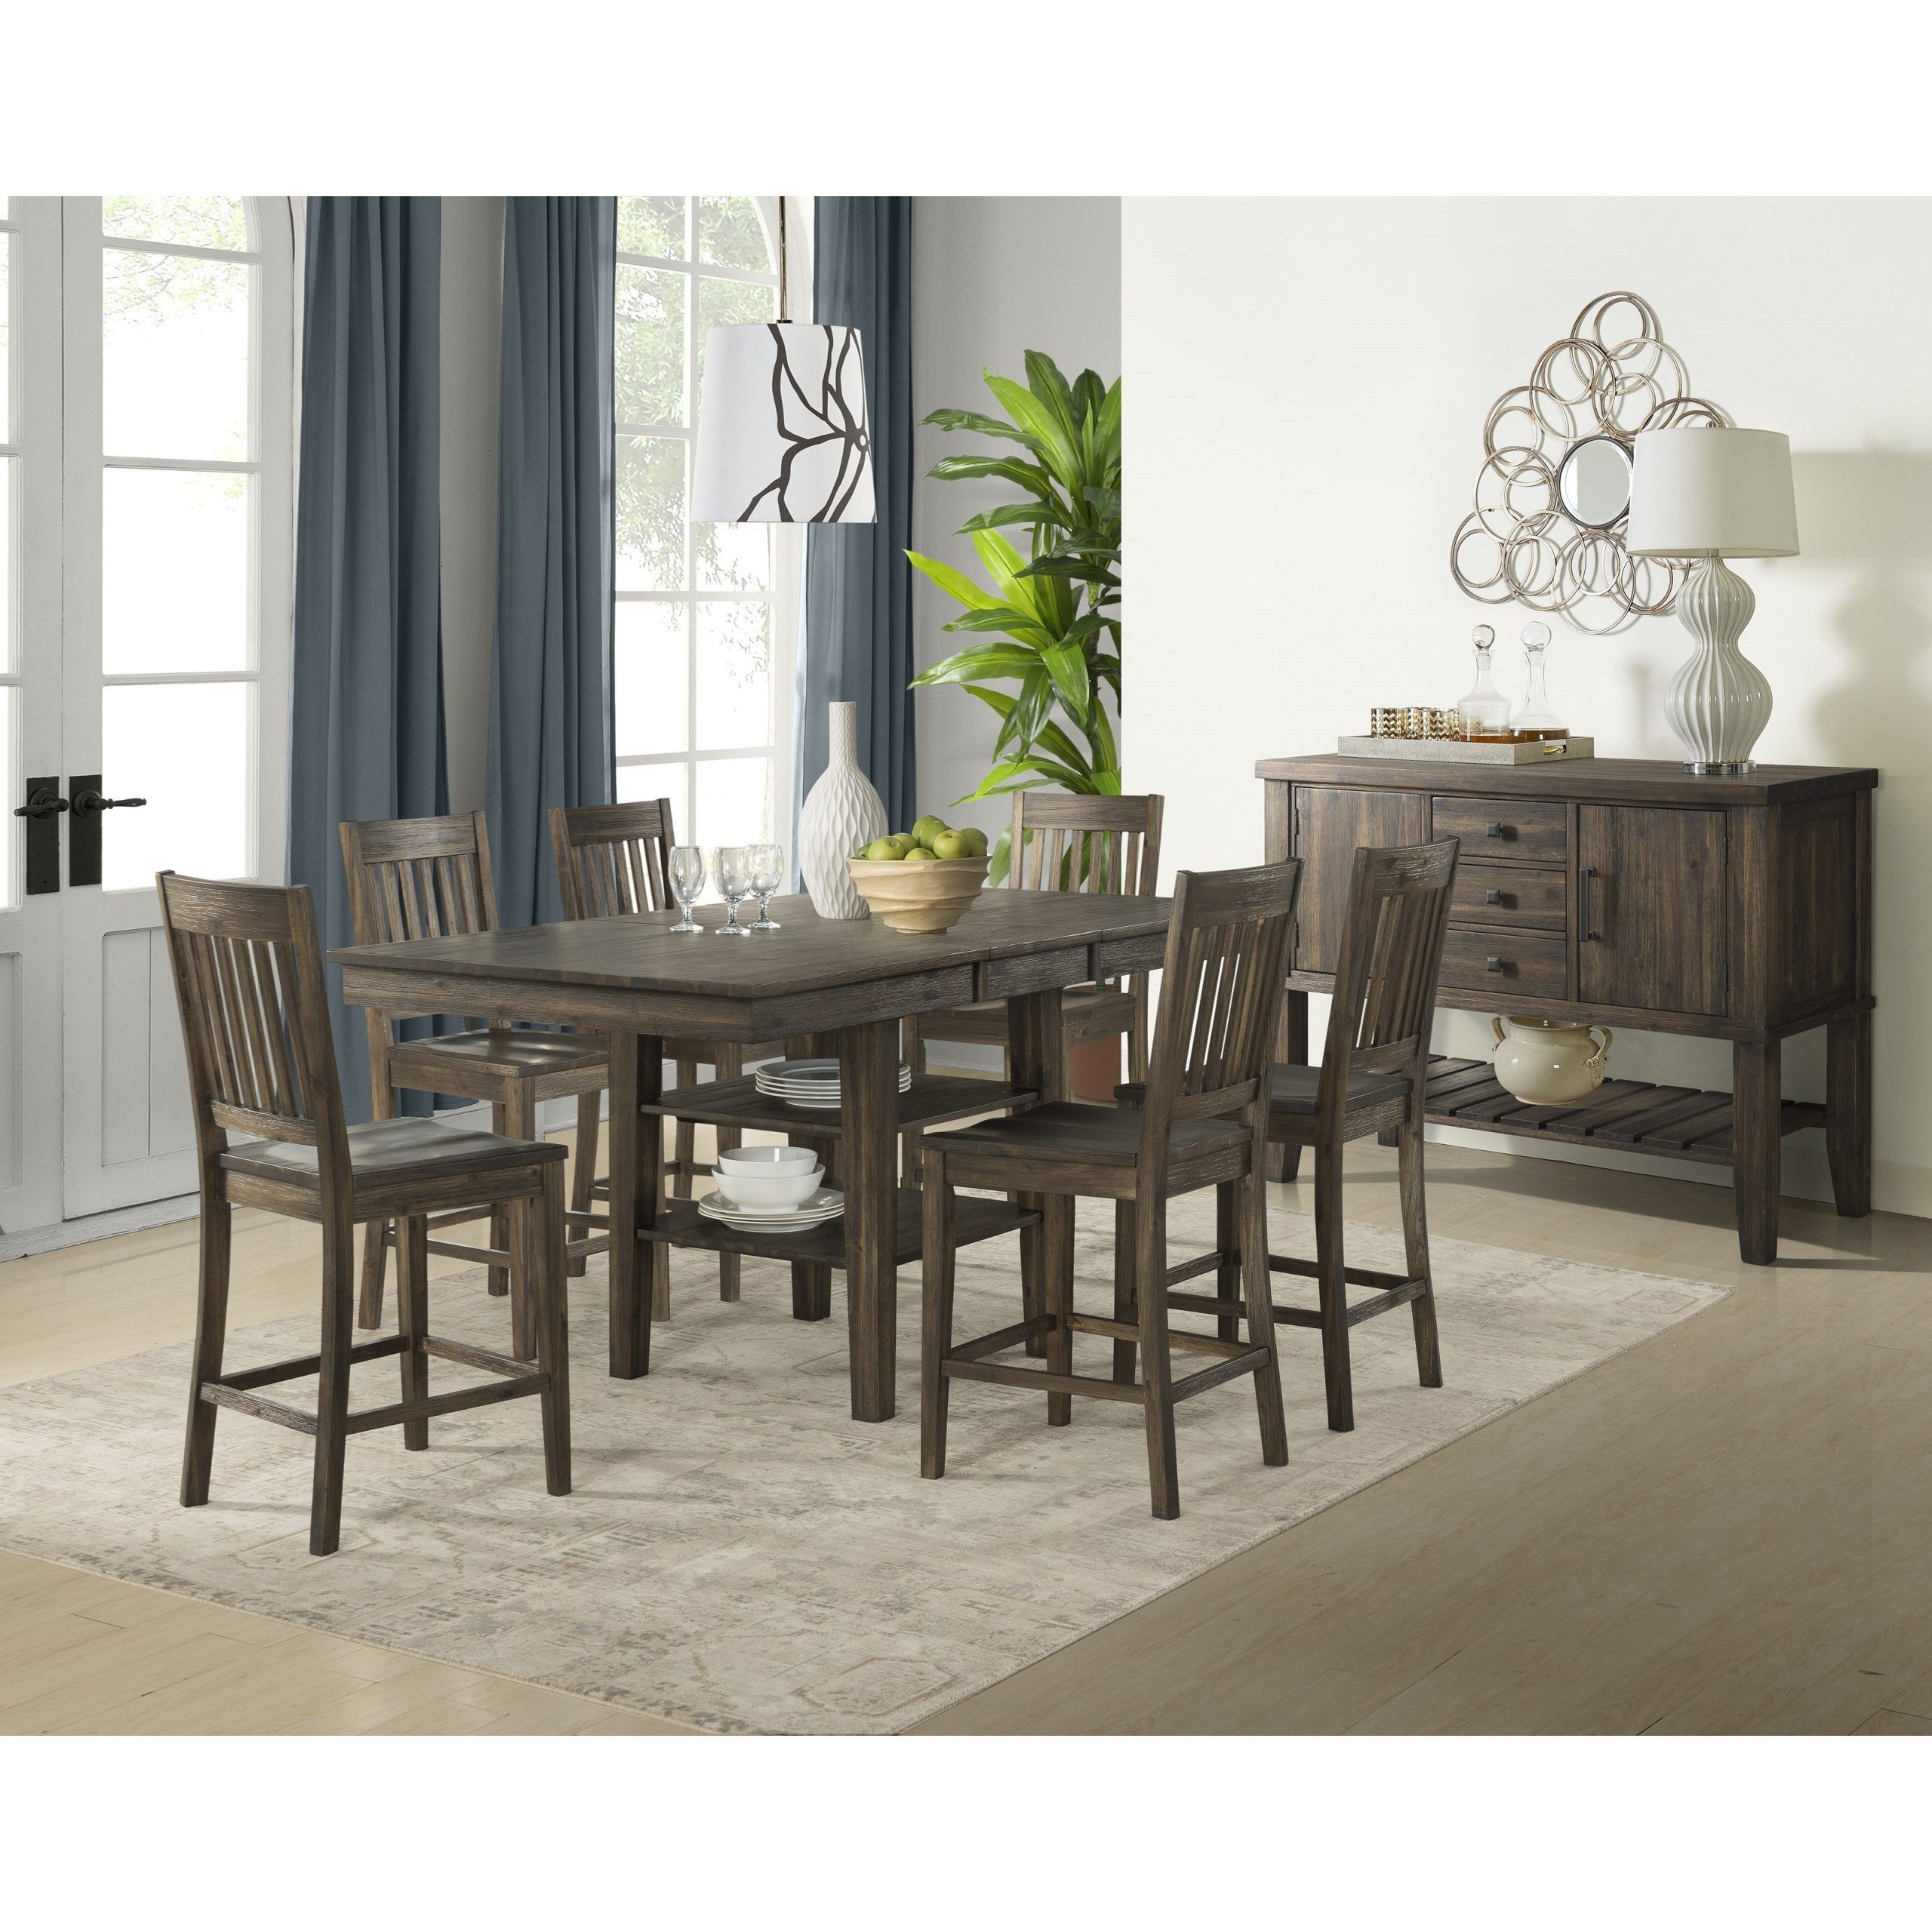 Barra Bar Height Pedestal Dining Tables With Regard To Well Known Aamerica Huron Transitional Solid Wood Counter Height (View 5 of 20)